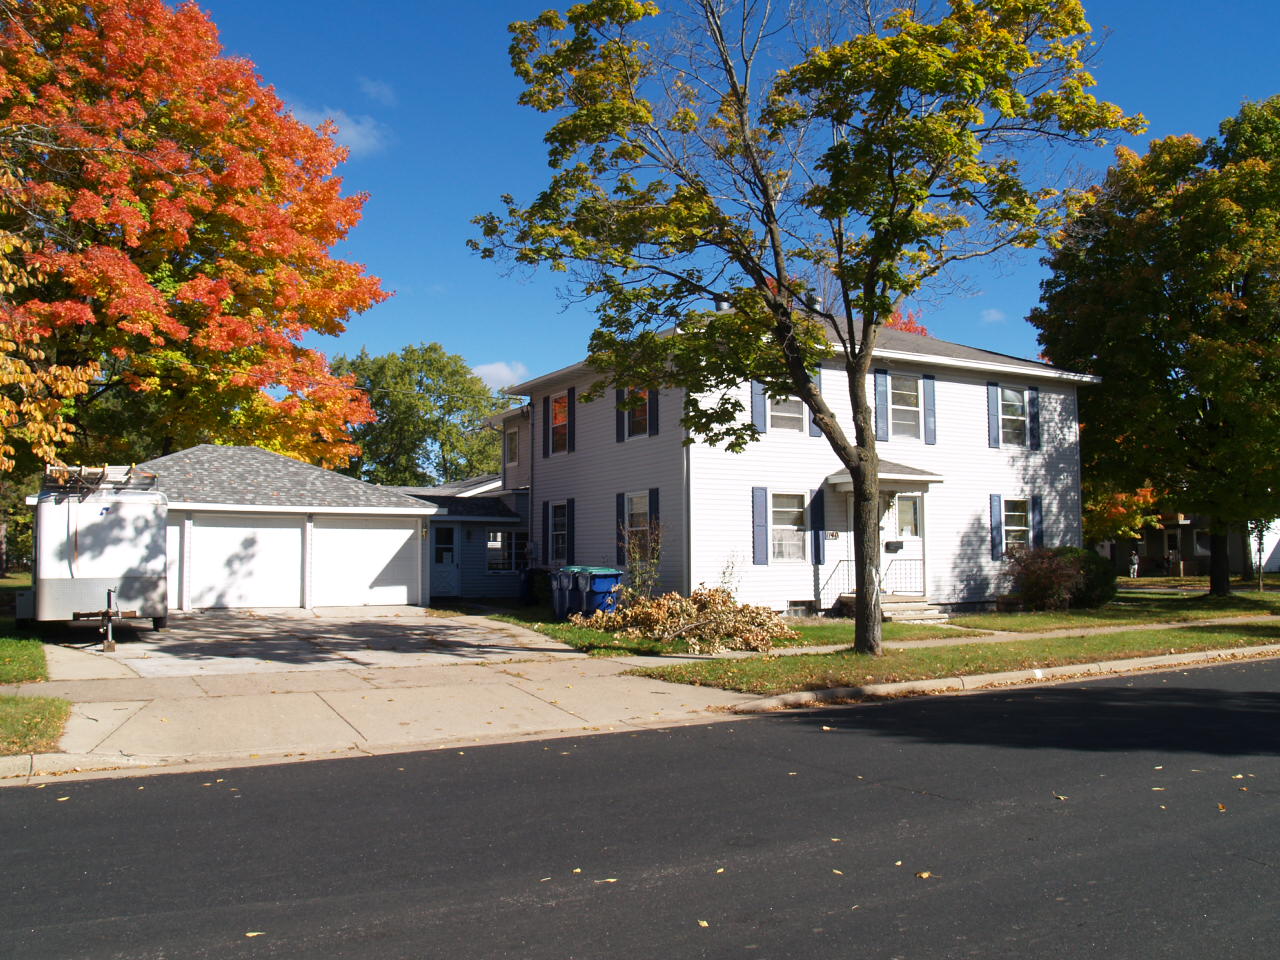 Residential home available for rent in Mosinee, WI